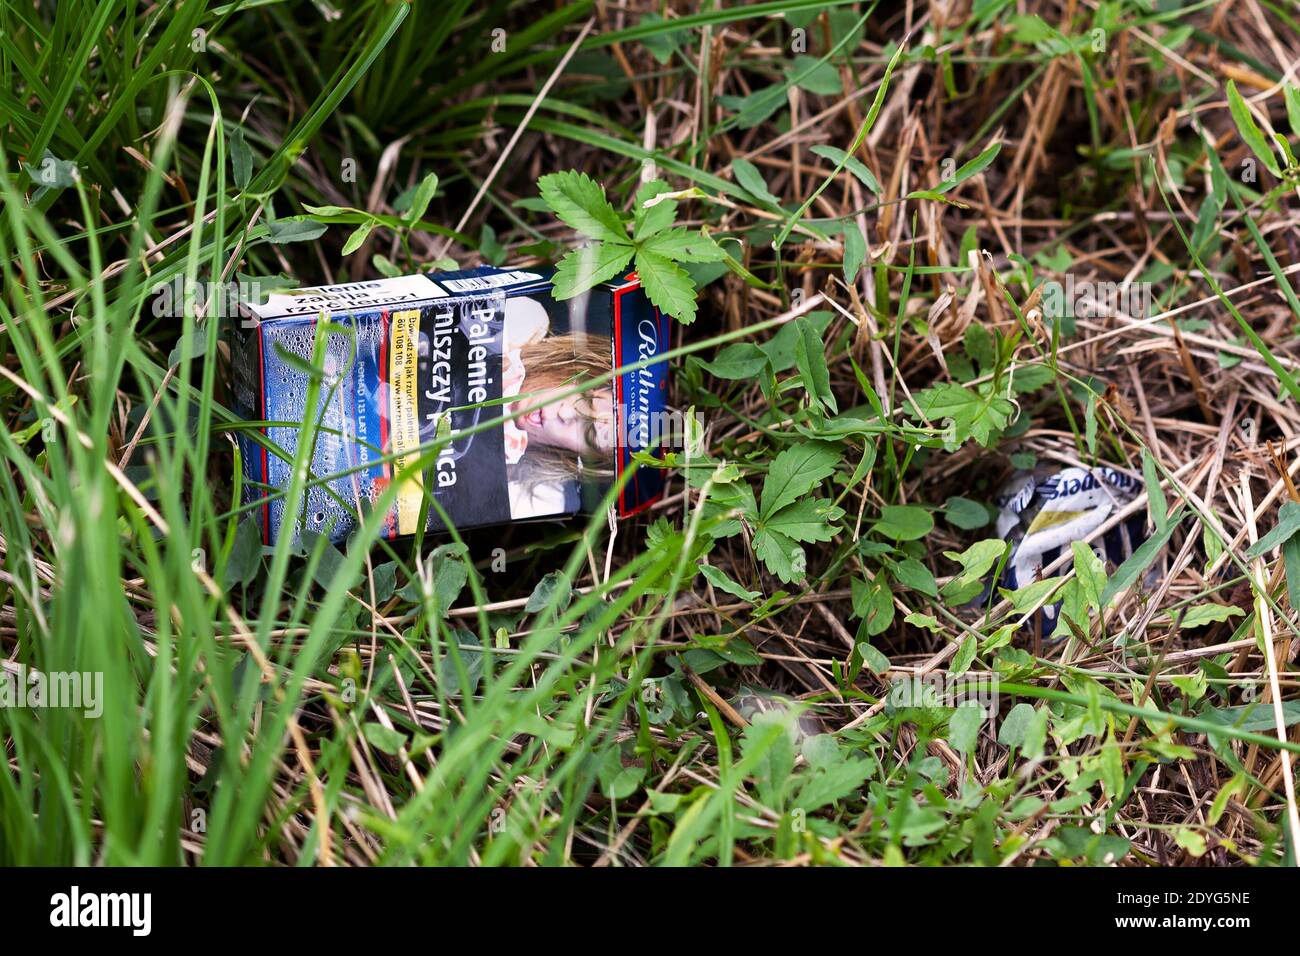 Empty pack, box of Polish cigarettes thrown away on the ground, garbage laying in the grass, closeup. Littering, trash, quitting smoking, habits Stock Photo